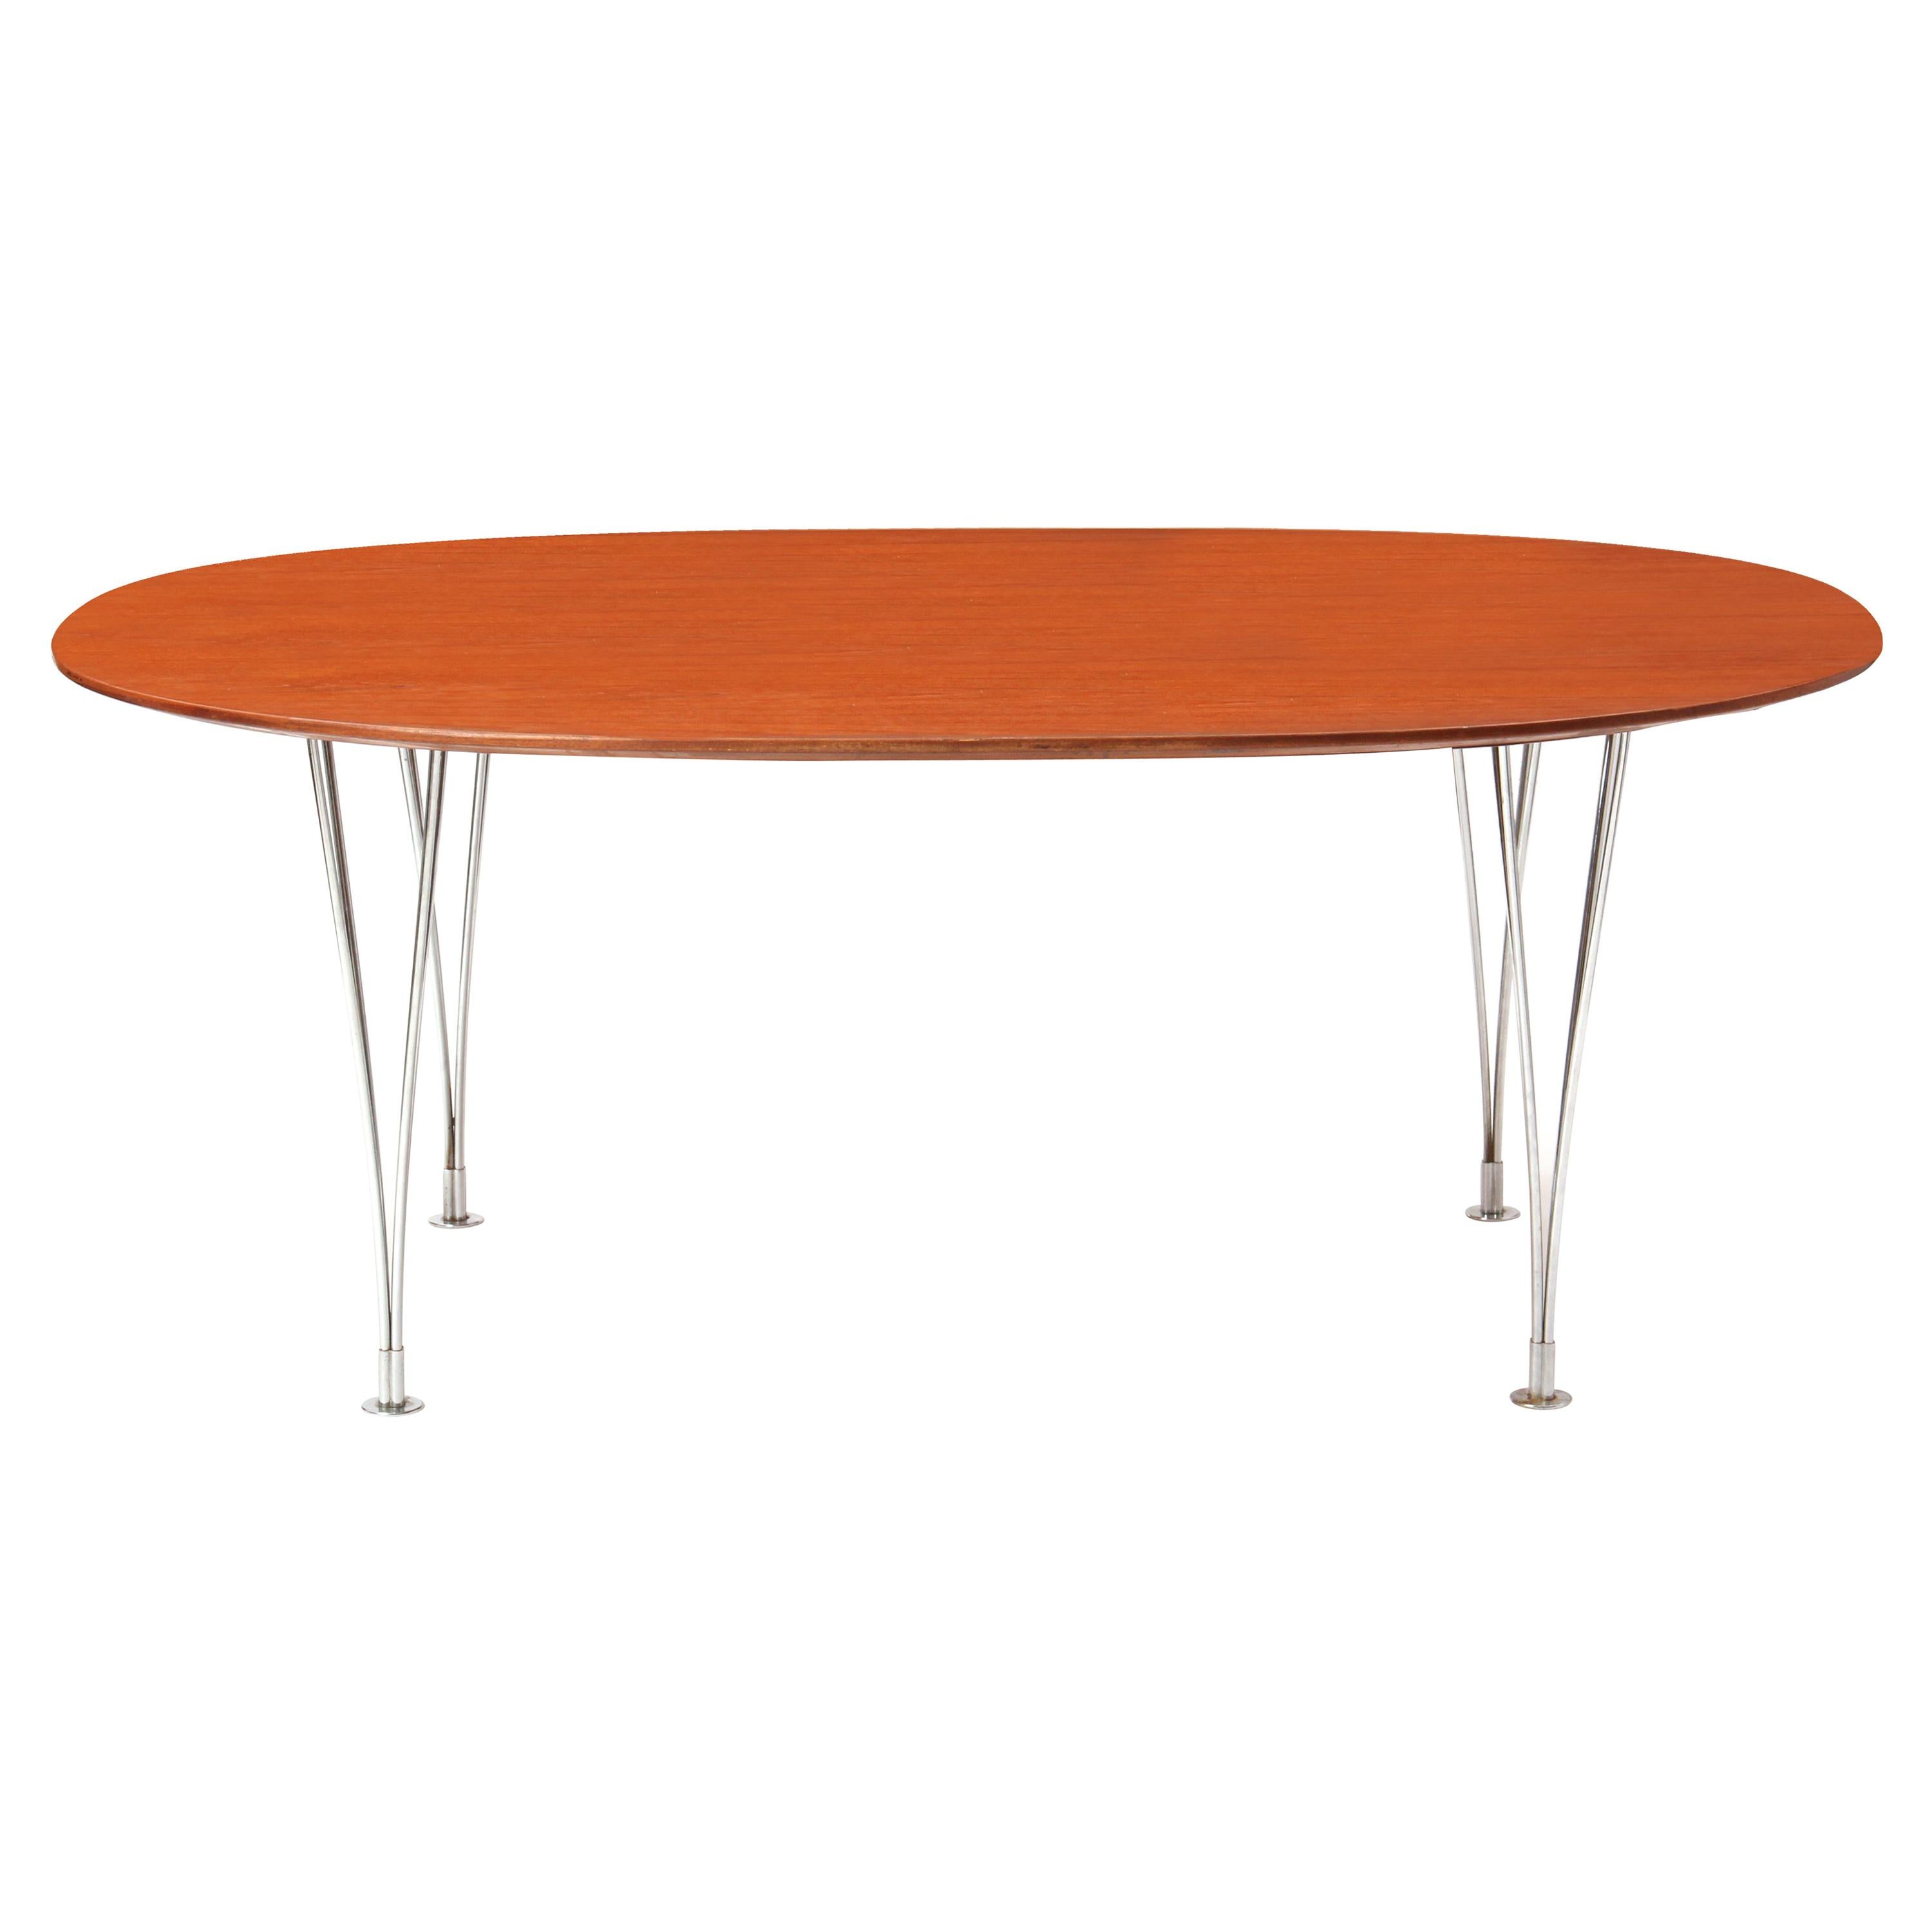 Early 'Super Ellipse' Teak Table by Piet Hein for Bruno Mathsson For Sale